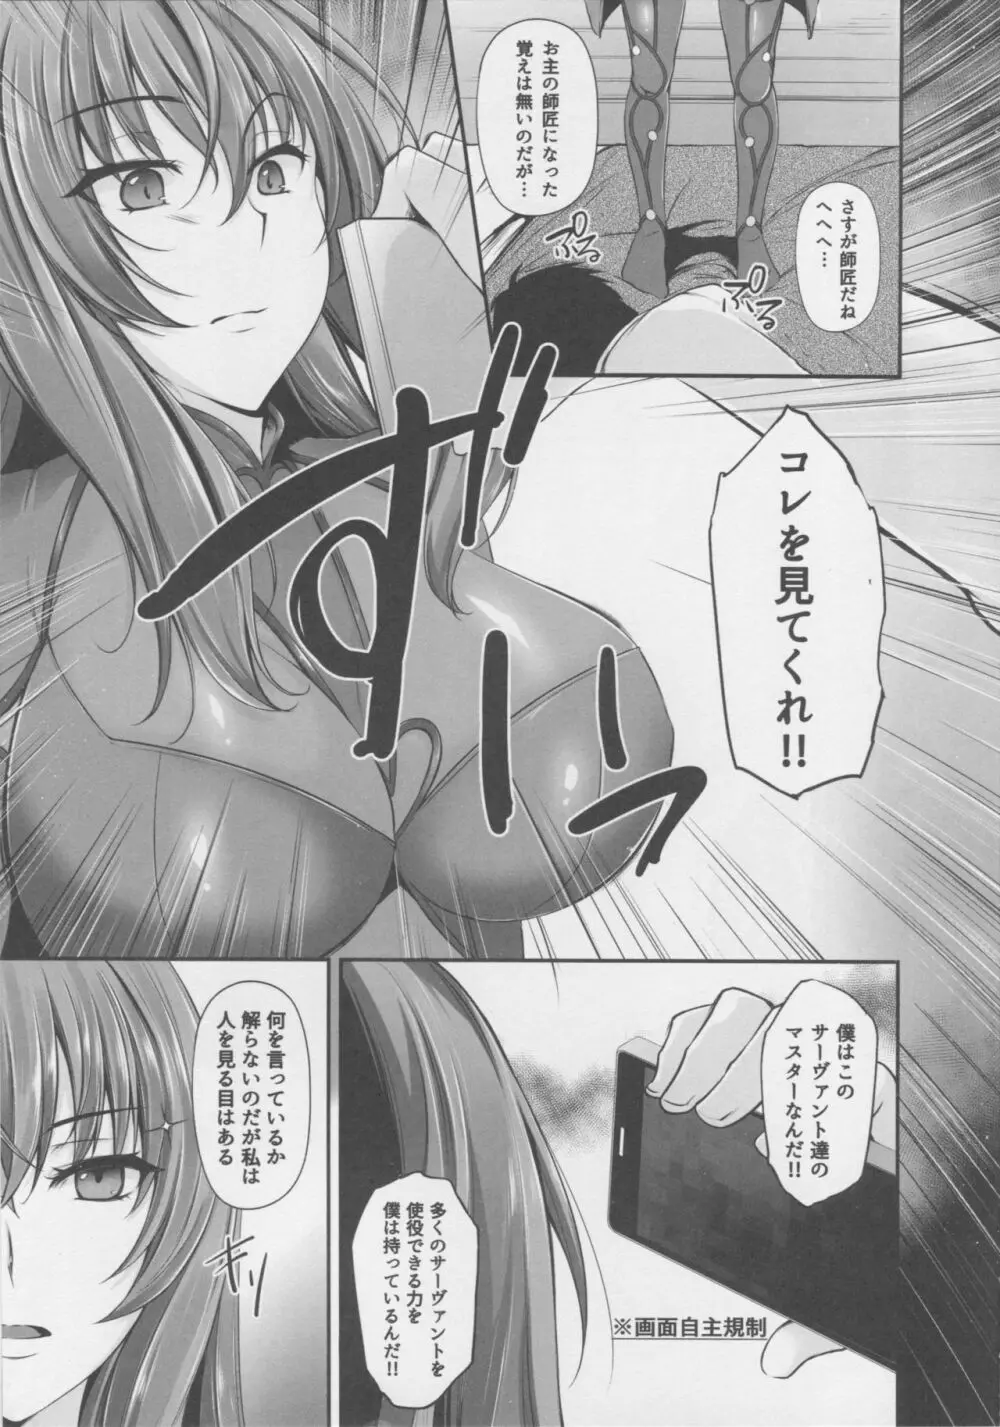 Scáthach - page6